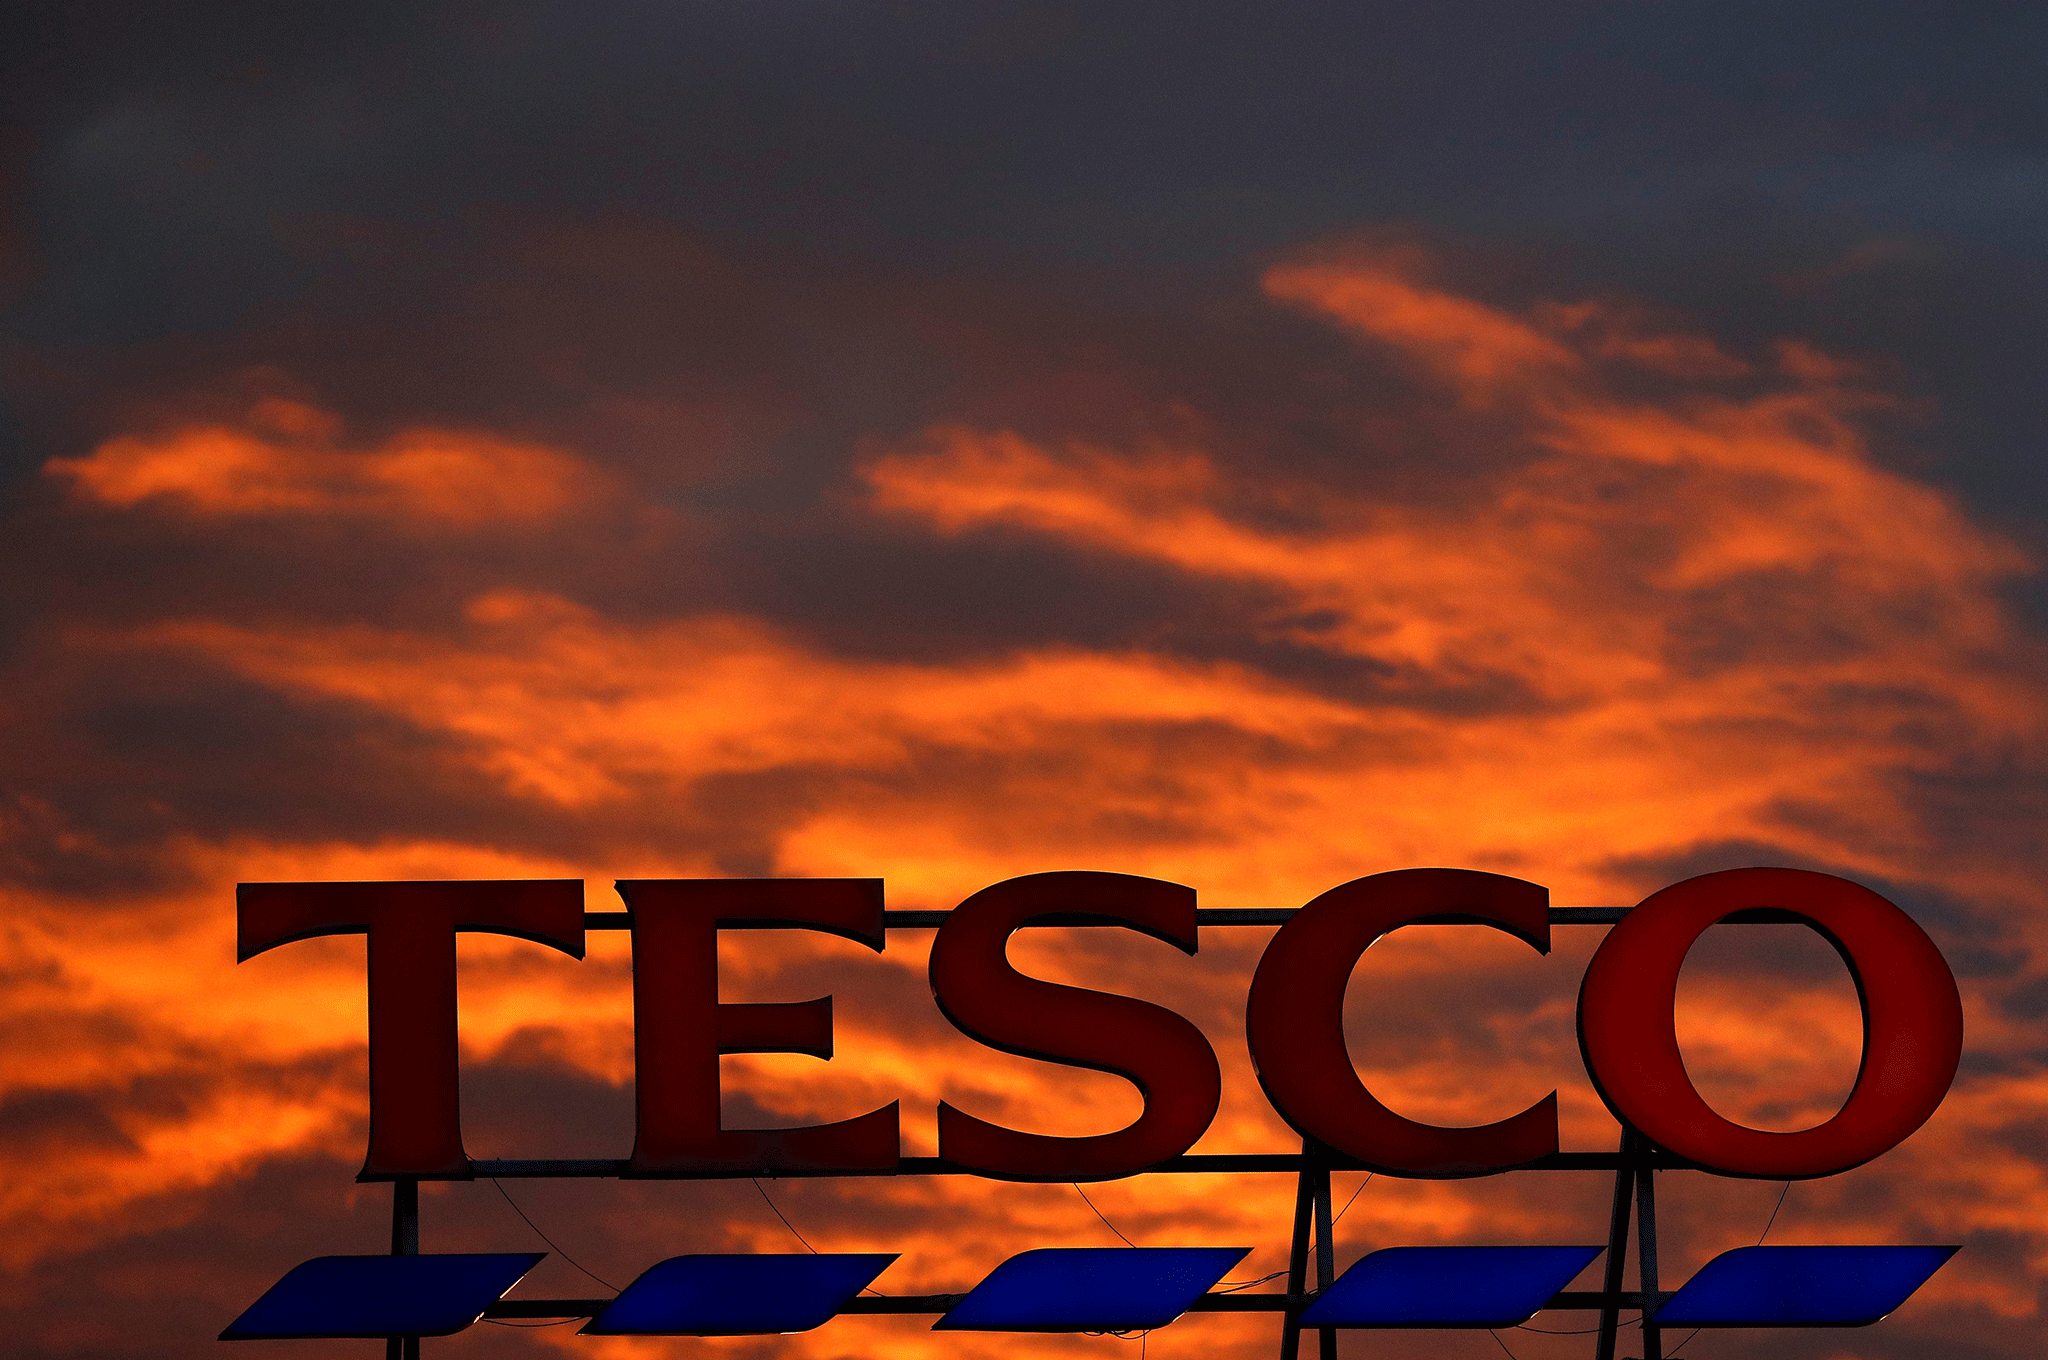 The Tesco scandal related to a £326m black hole in the retailer's accounts